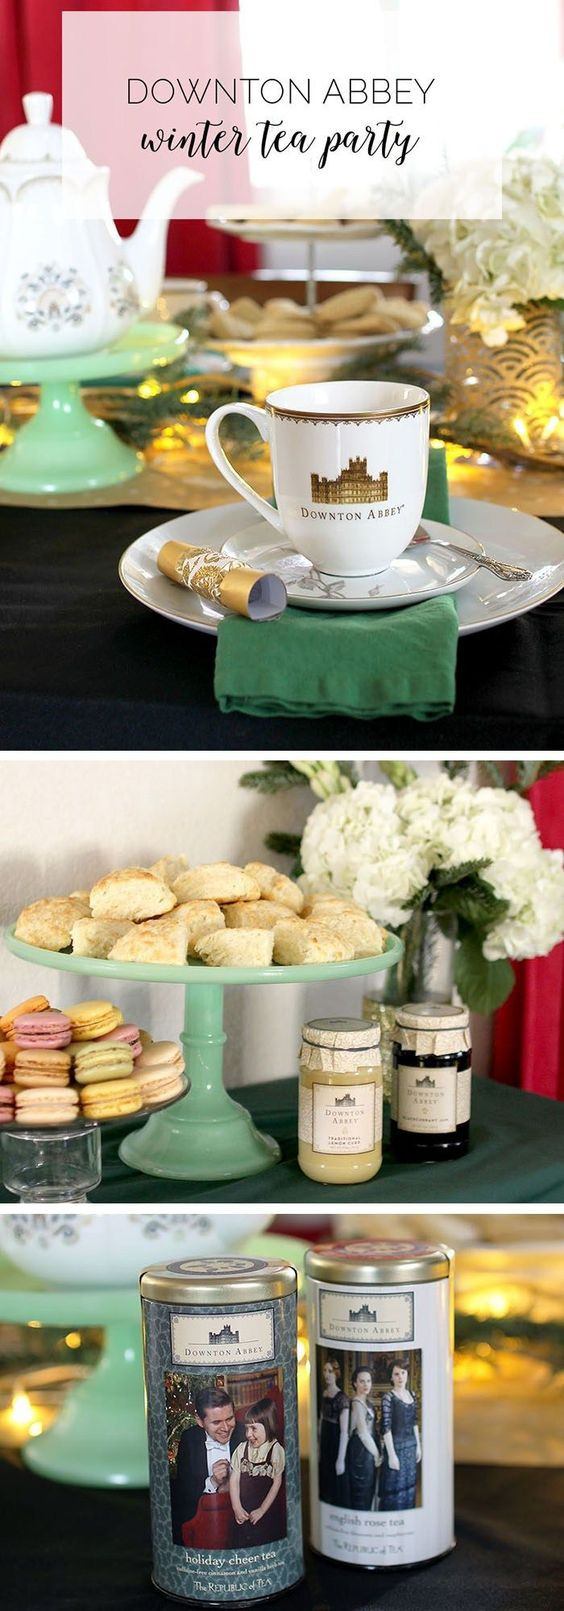 Winter Tea Party Ideas
 How to Host a Downton Abbey Winter Tea Party